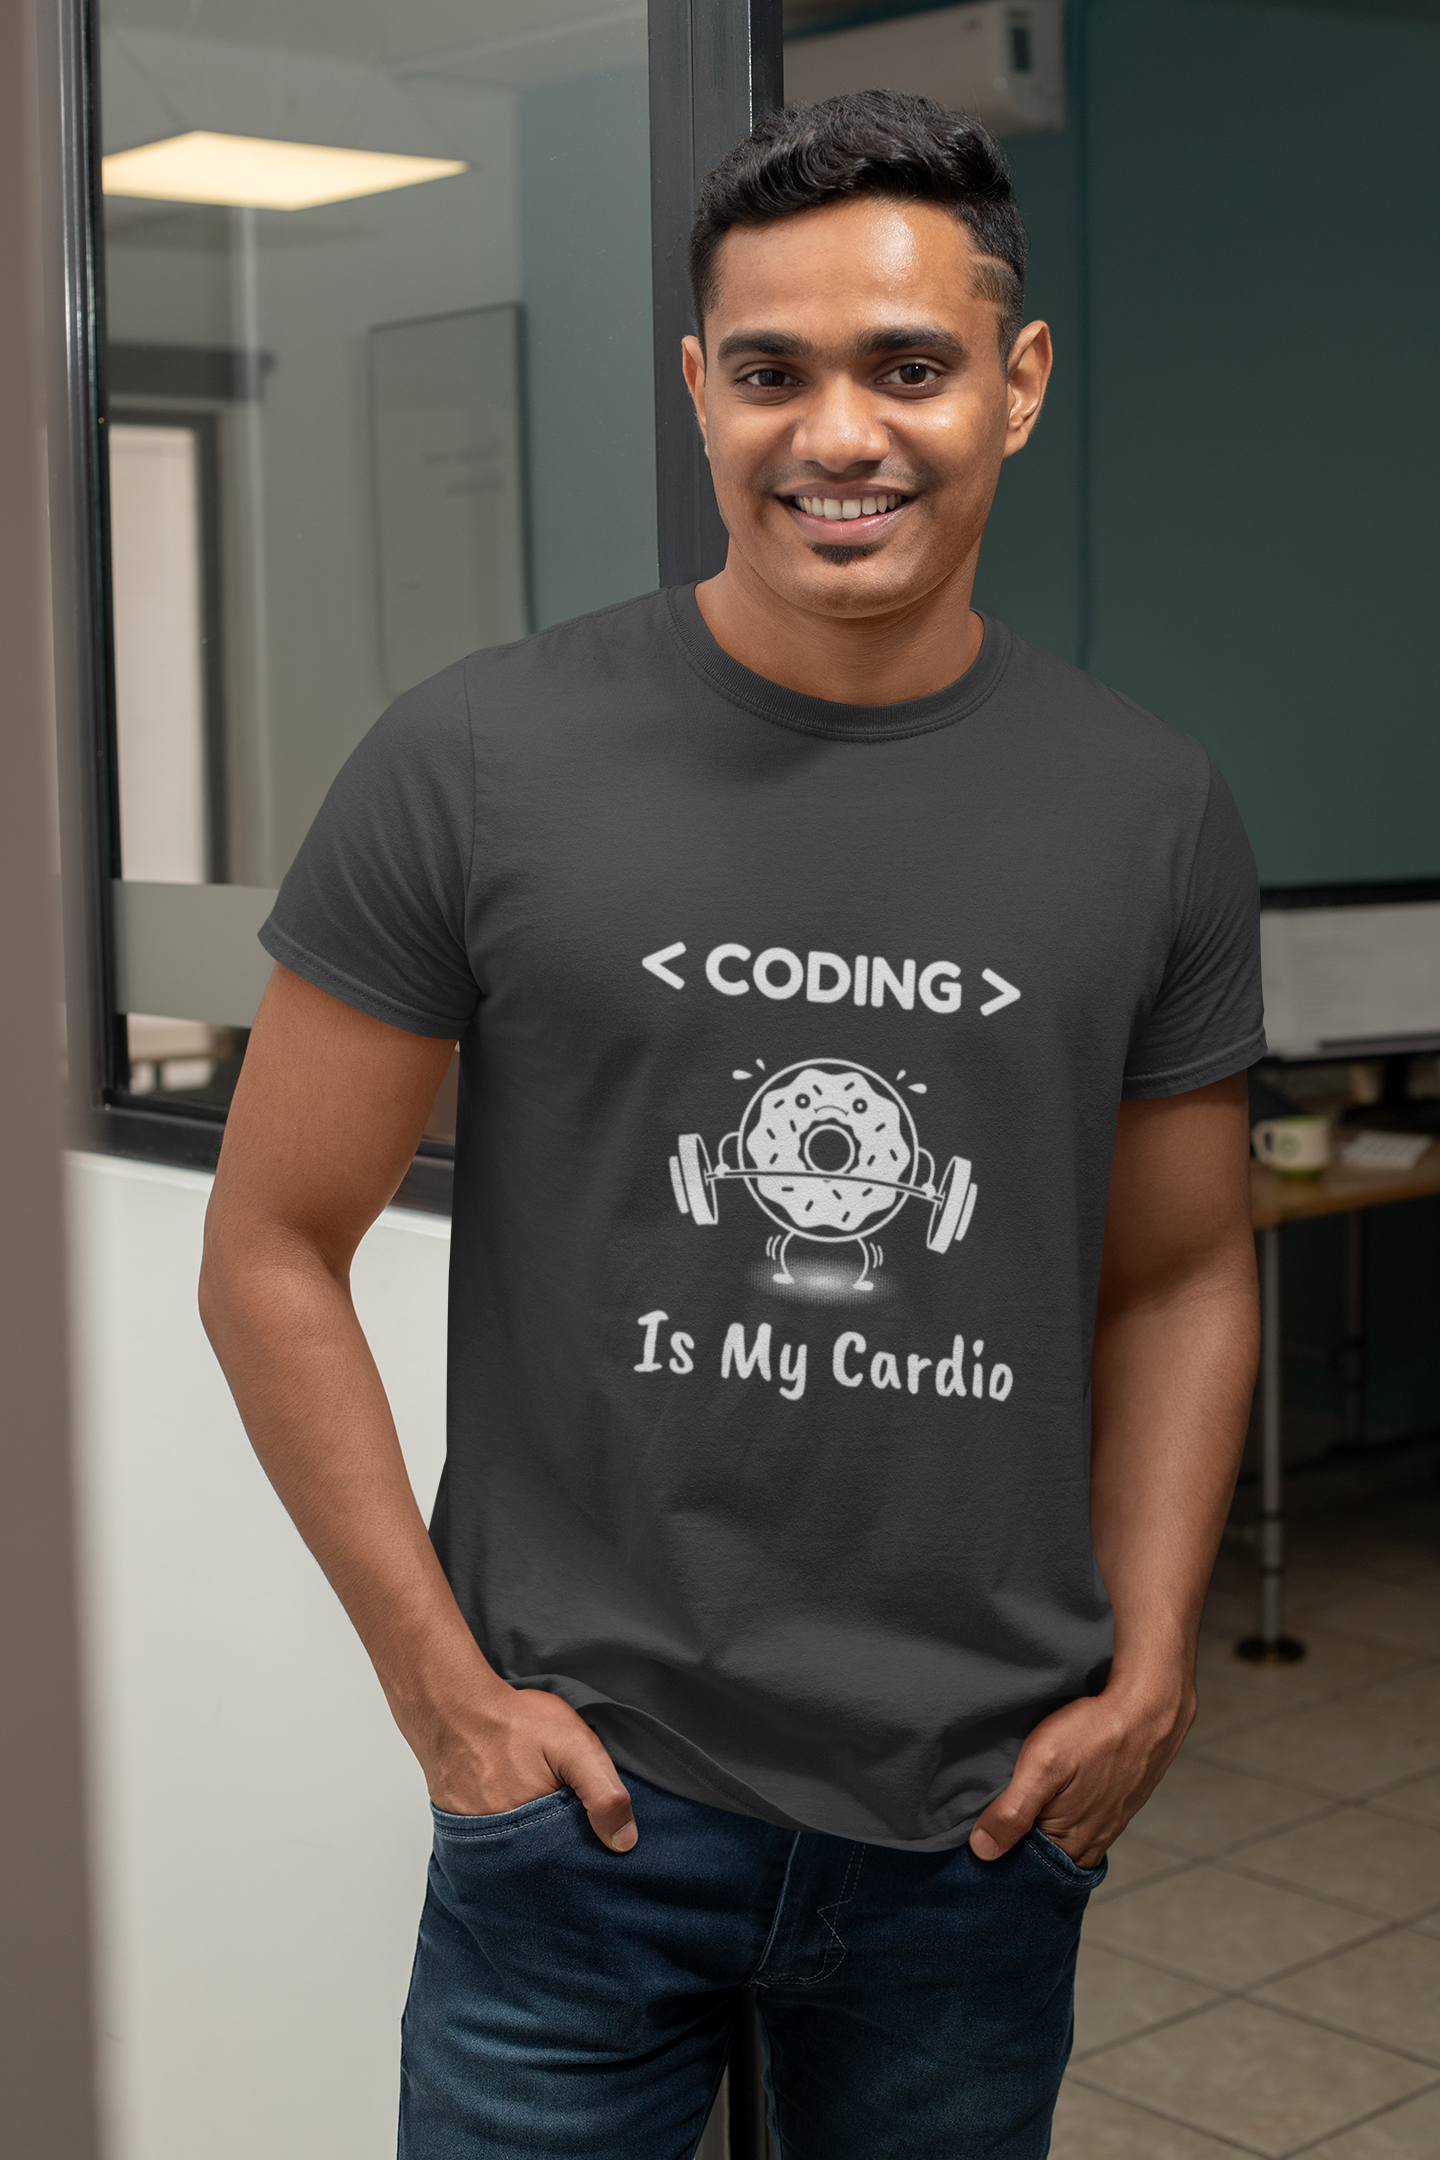 Coding Is My Cardio | T-Shirt For Developers & Coders